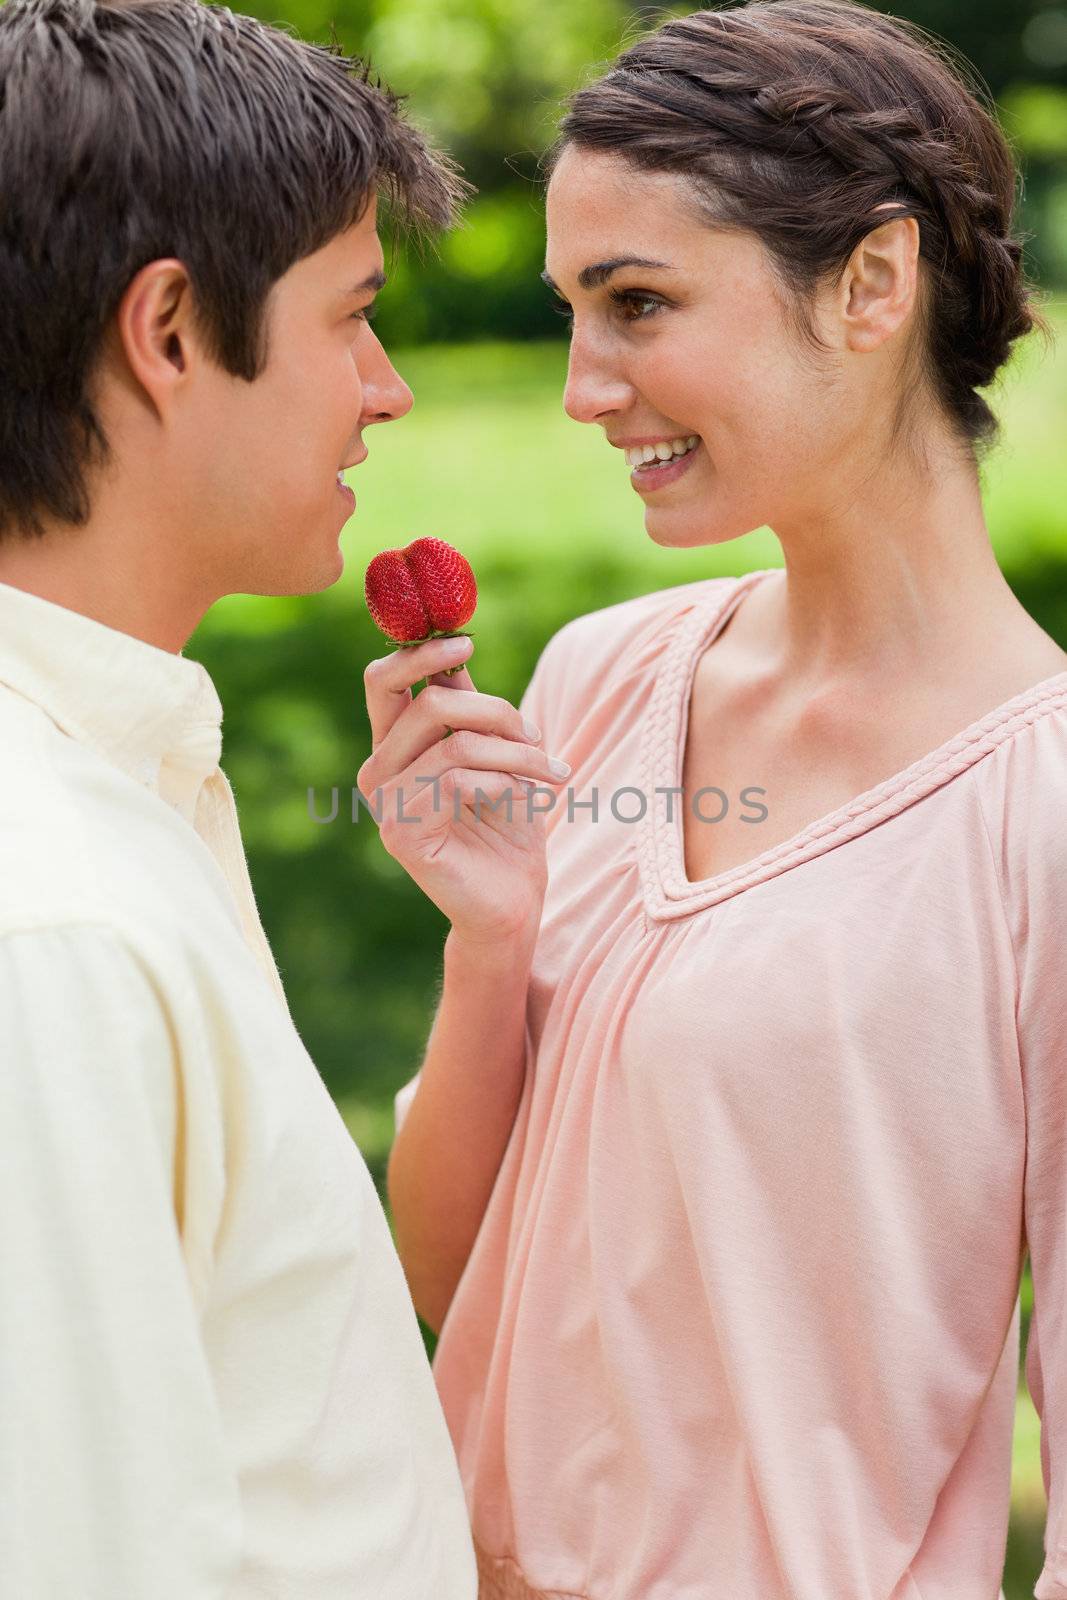 Woman laughing while offering a strawberry to her friend by Wavebreakmedia